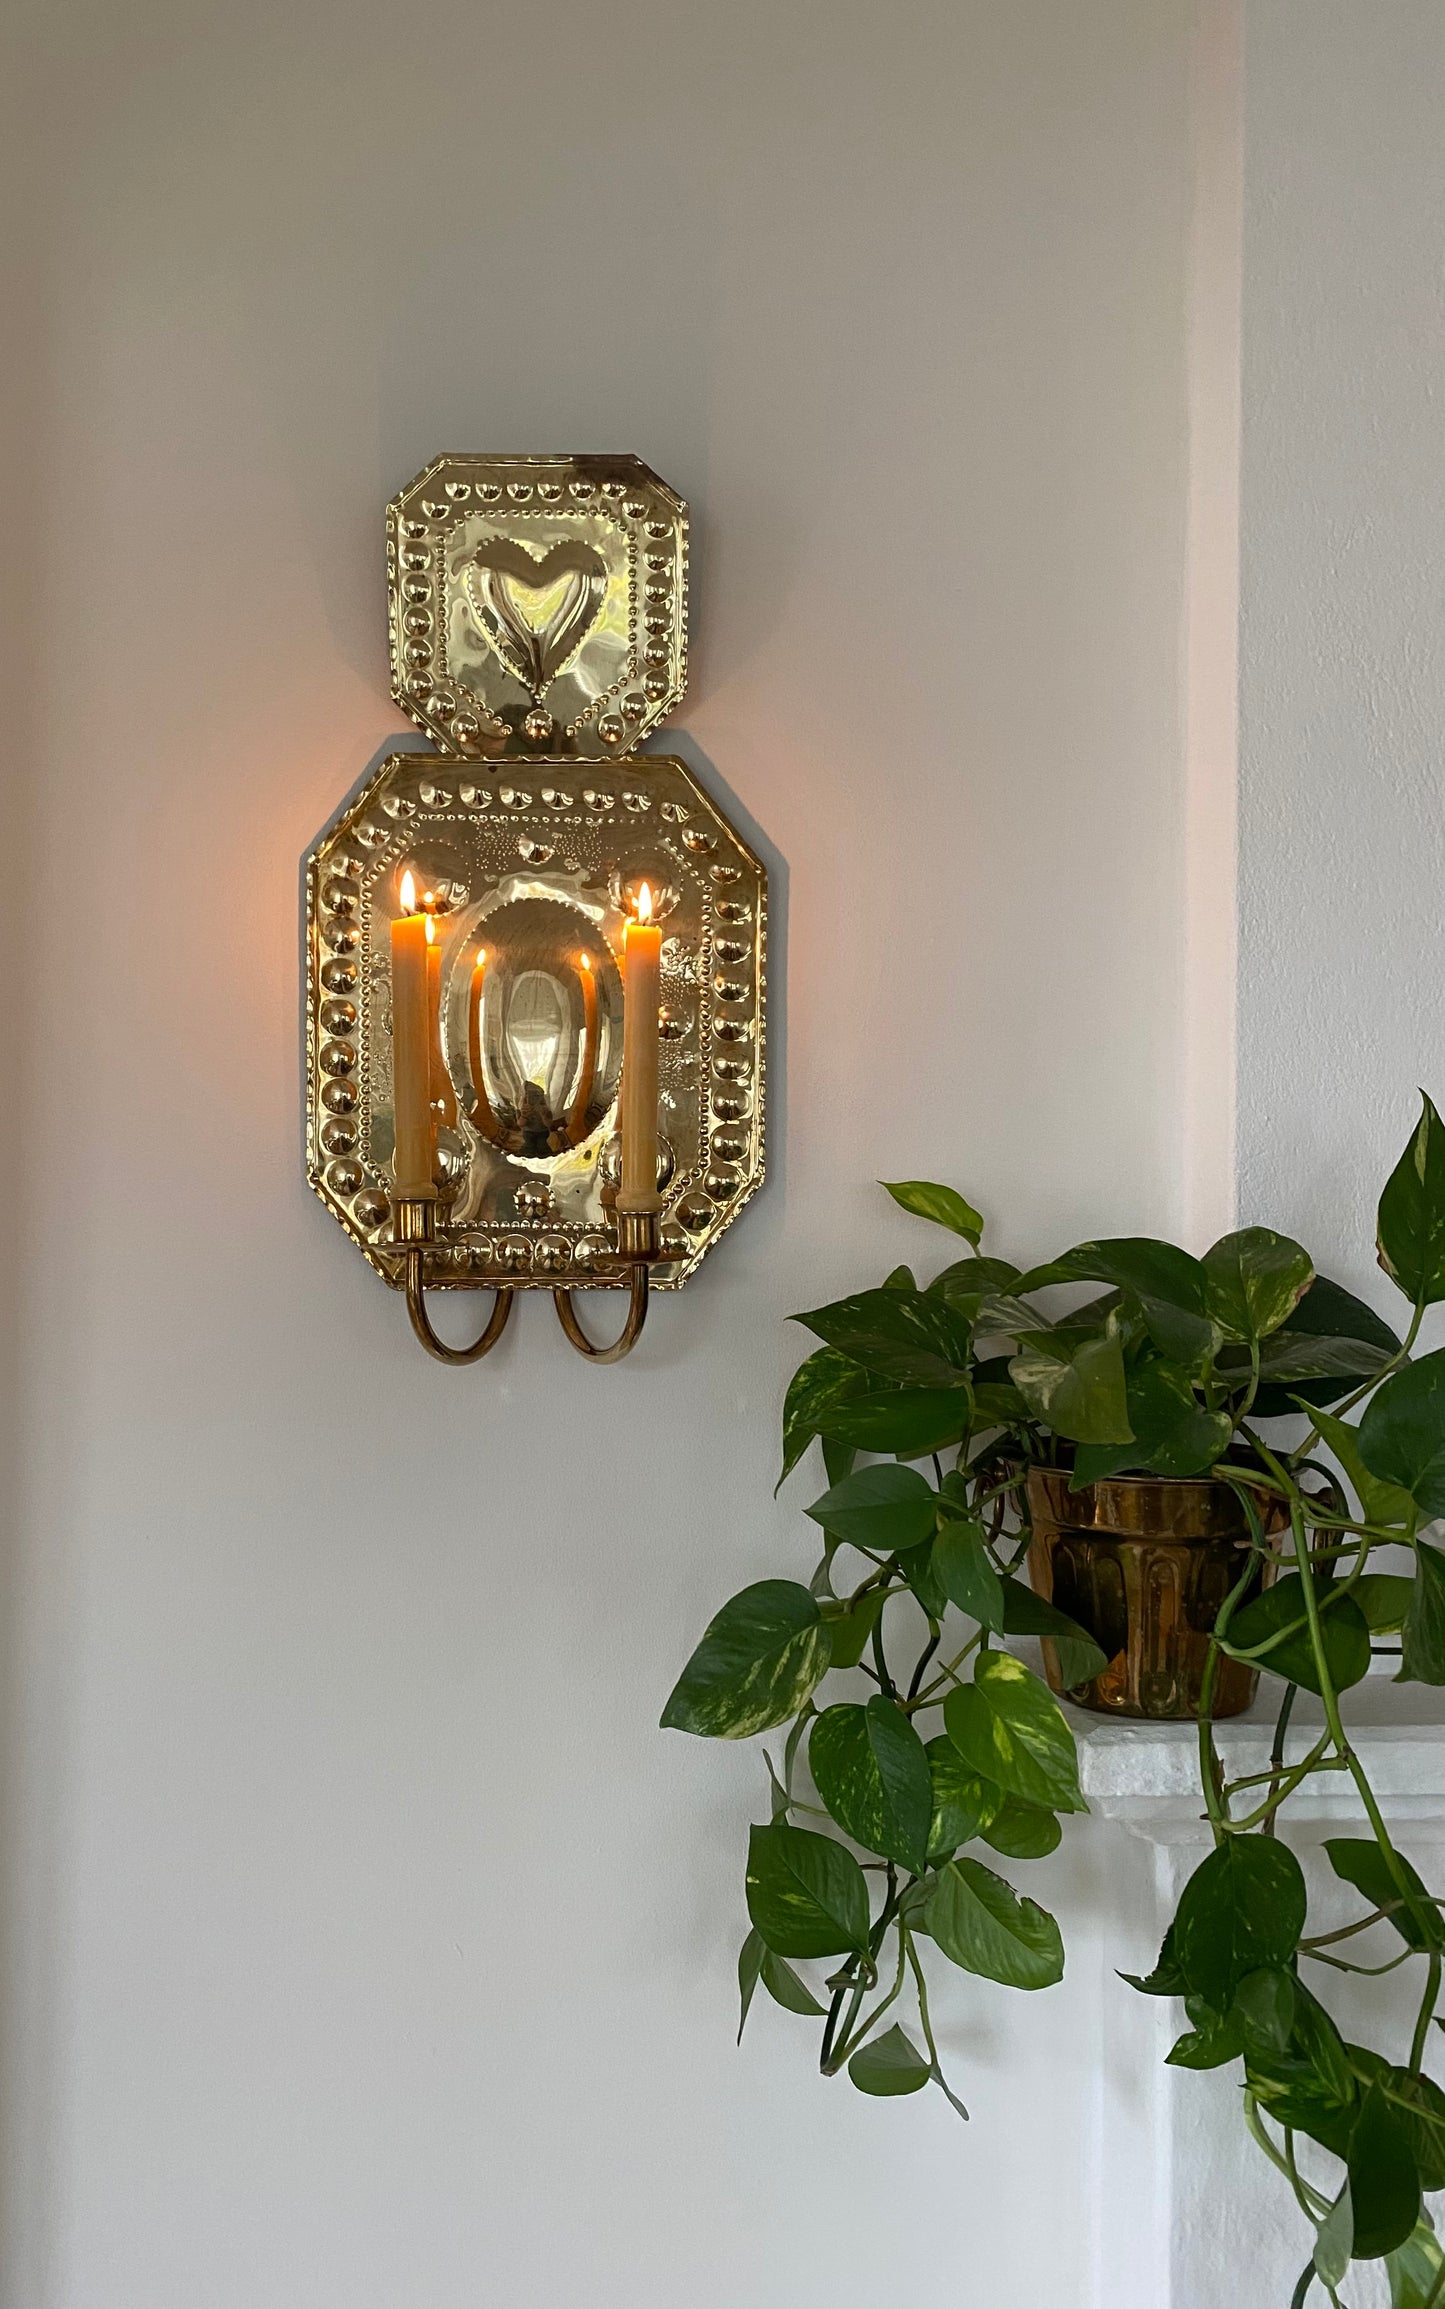 Large brass wall sconce